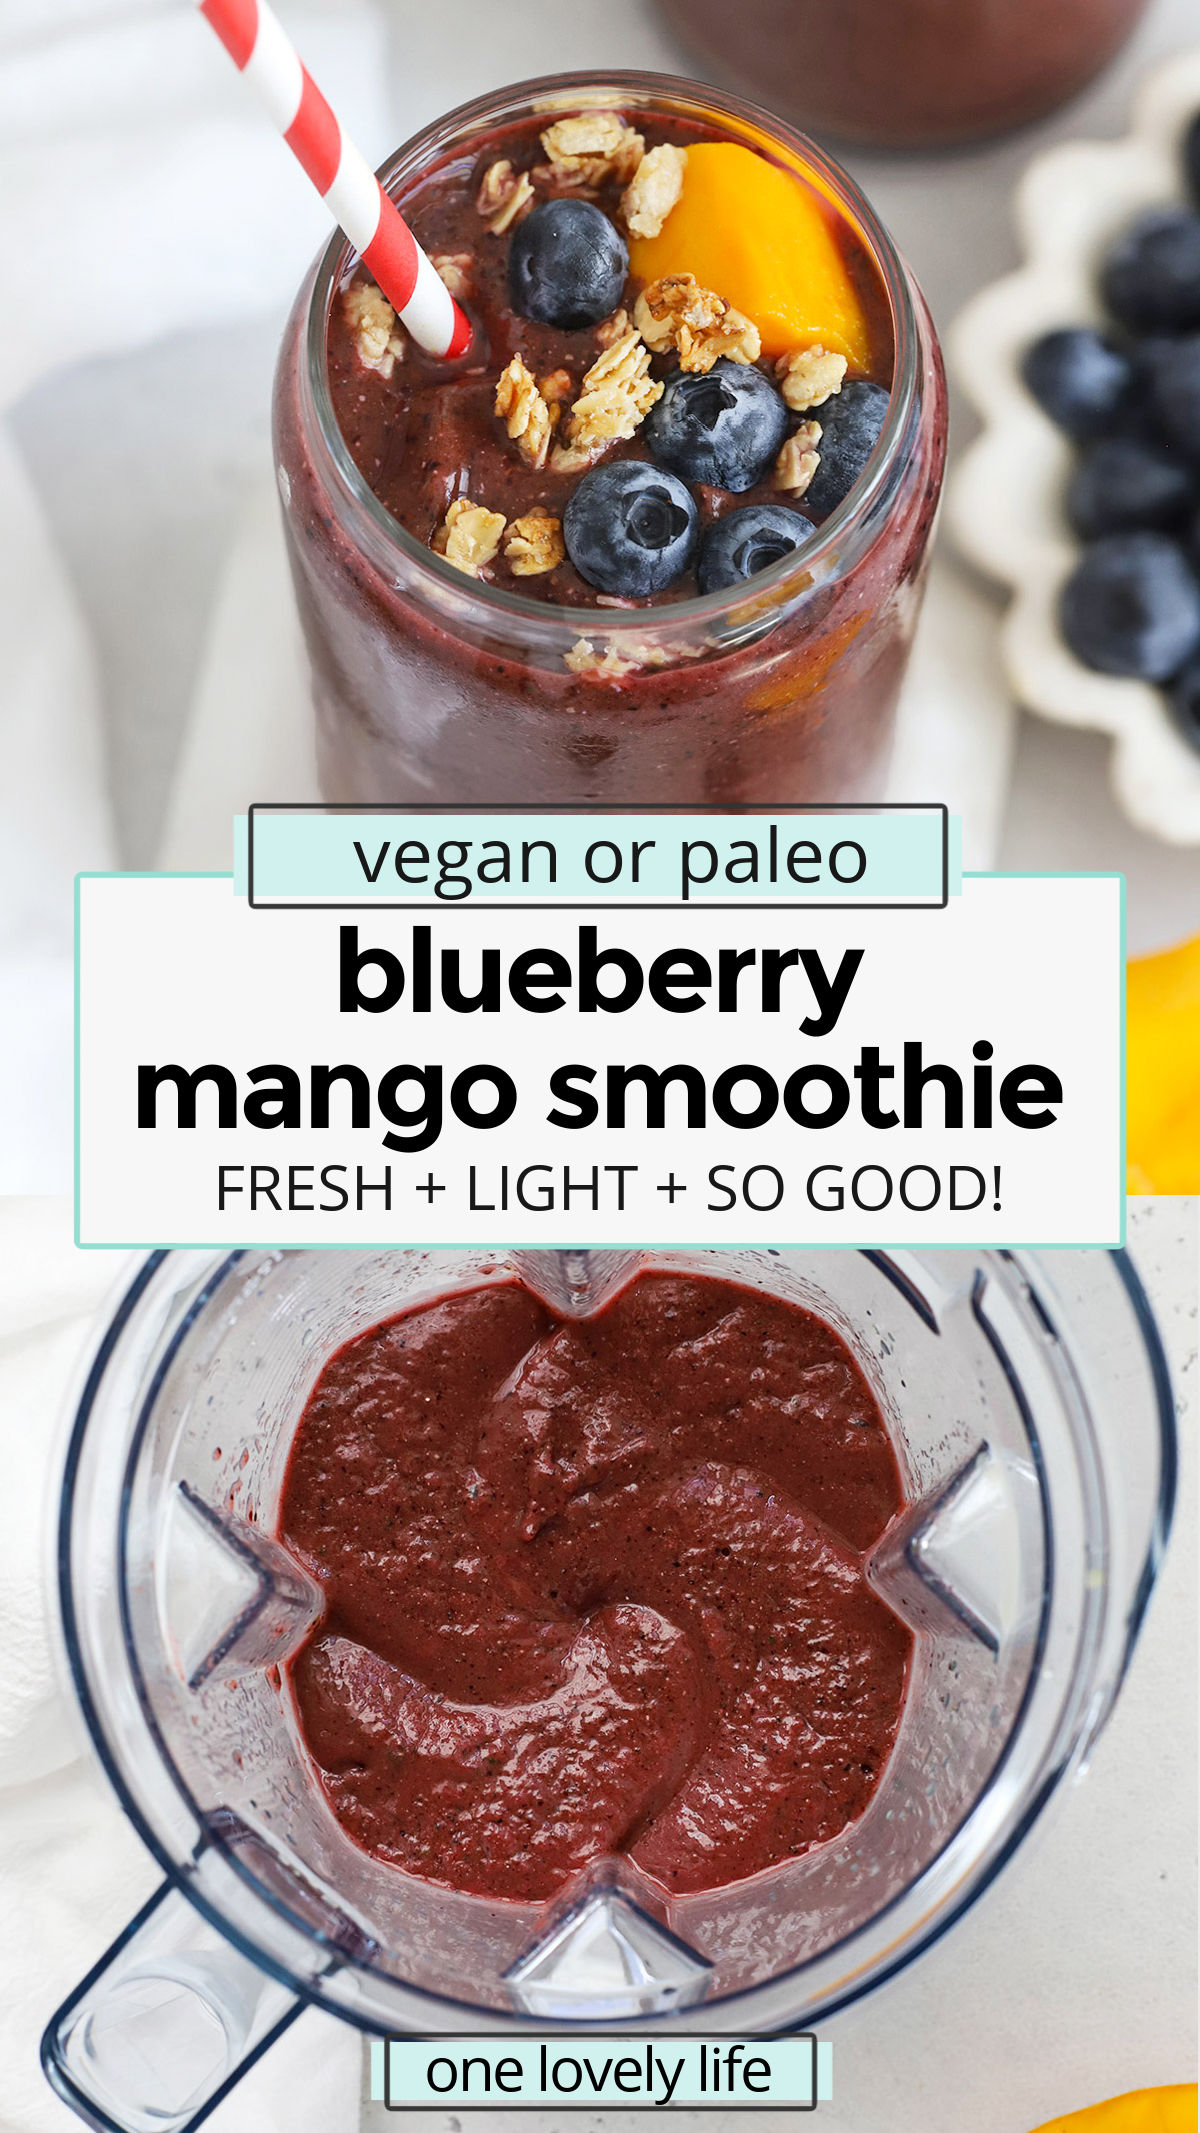 Blueberry Mango Smoothie - This yummy mango berry smoothie recipe is refreshing, light & delicious. The whole family loves it! Vegan or Paleo // Blueberry Smoothies / Mango smoothies // mango berry smoothie recipe // berry mango smoothie // mango blueberry smoothies / kid friendly smoothie / purple smoothie / fruit smoothie / breakfast smoothie / paleo smoothie / vegan smoothie / green smoothie